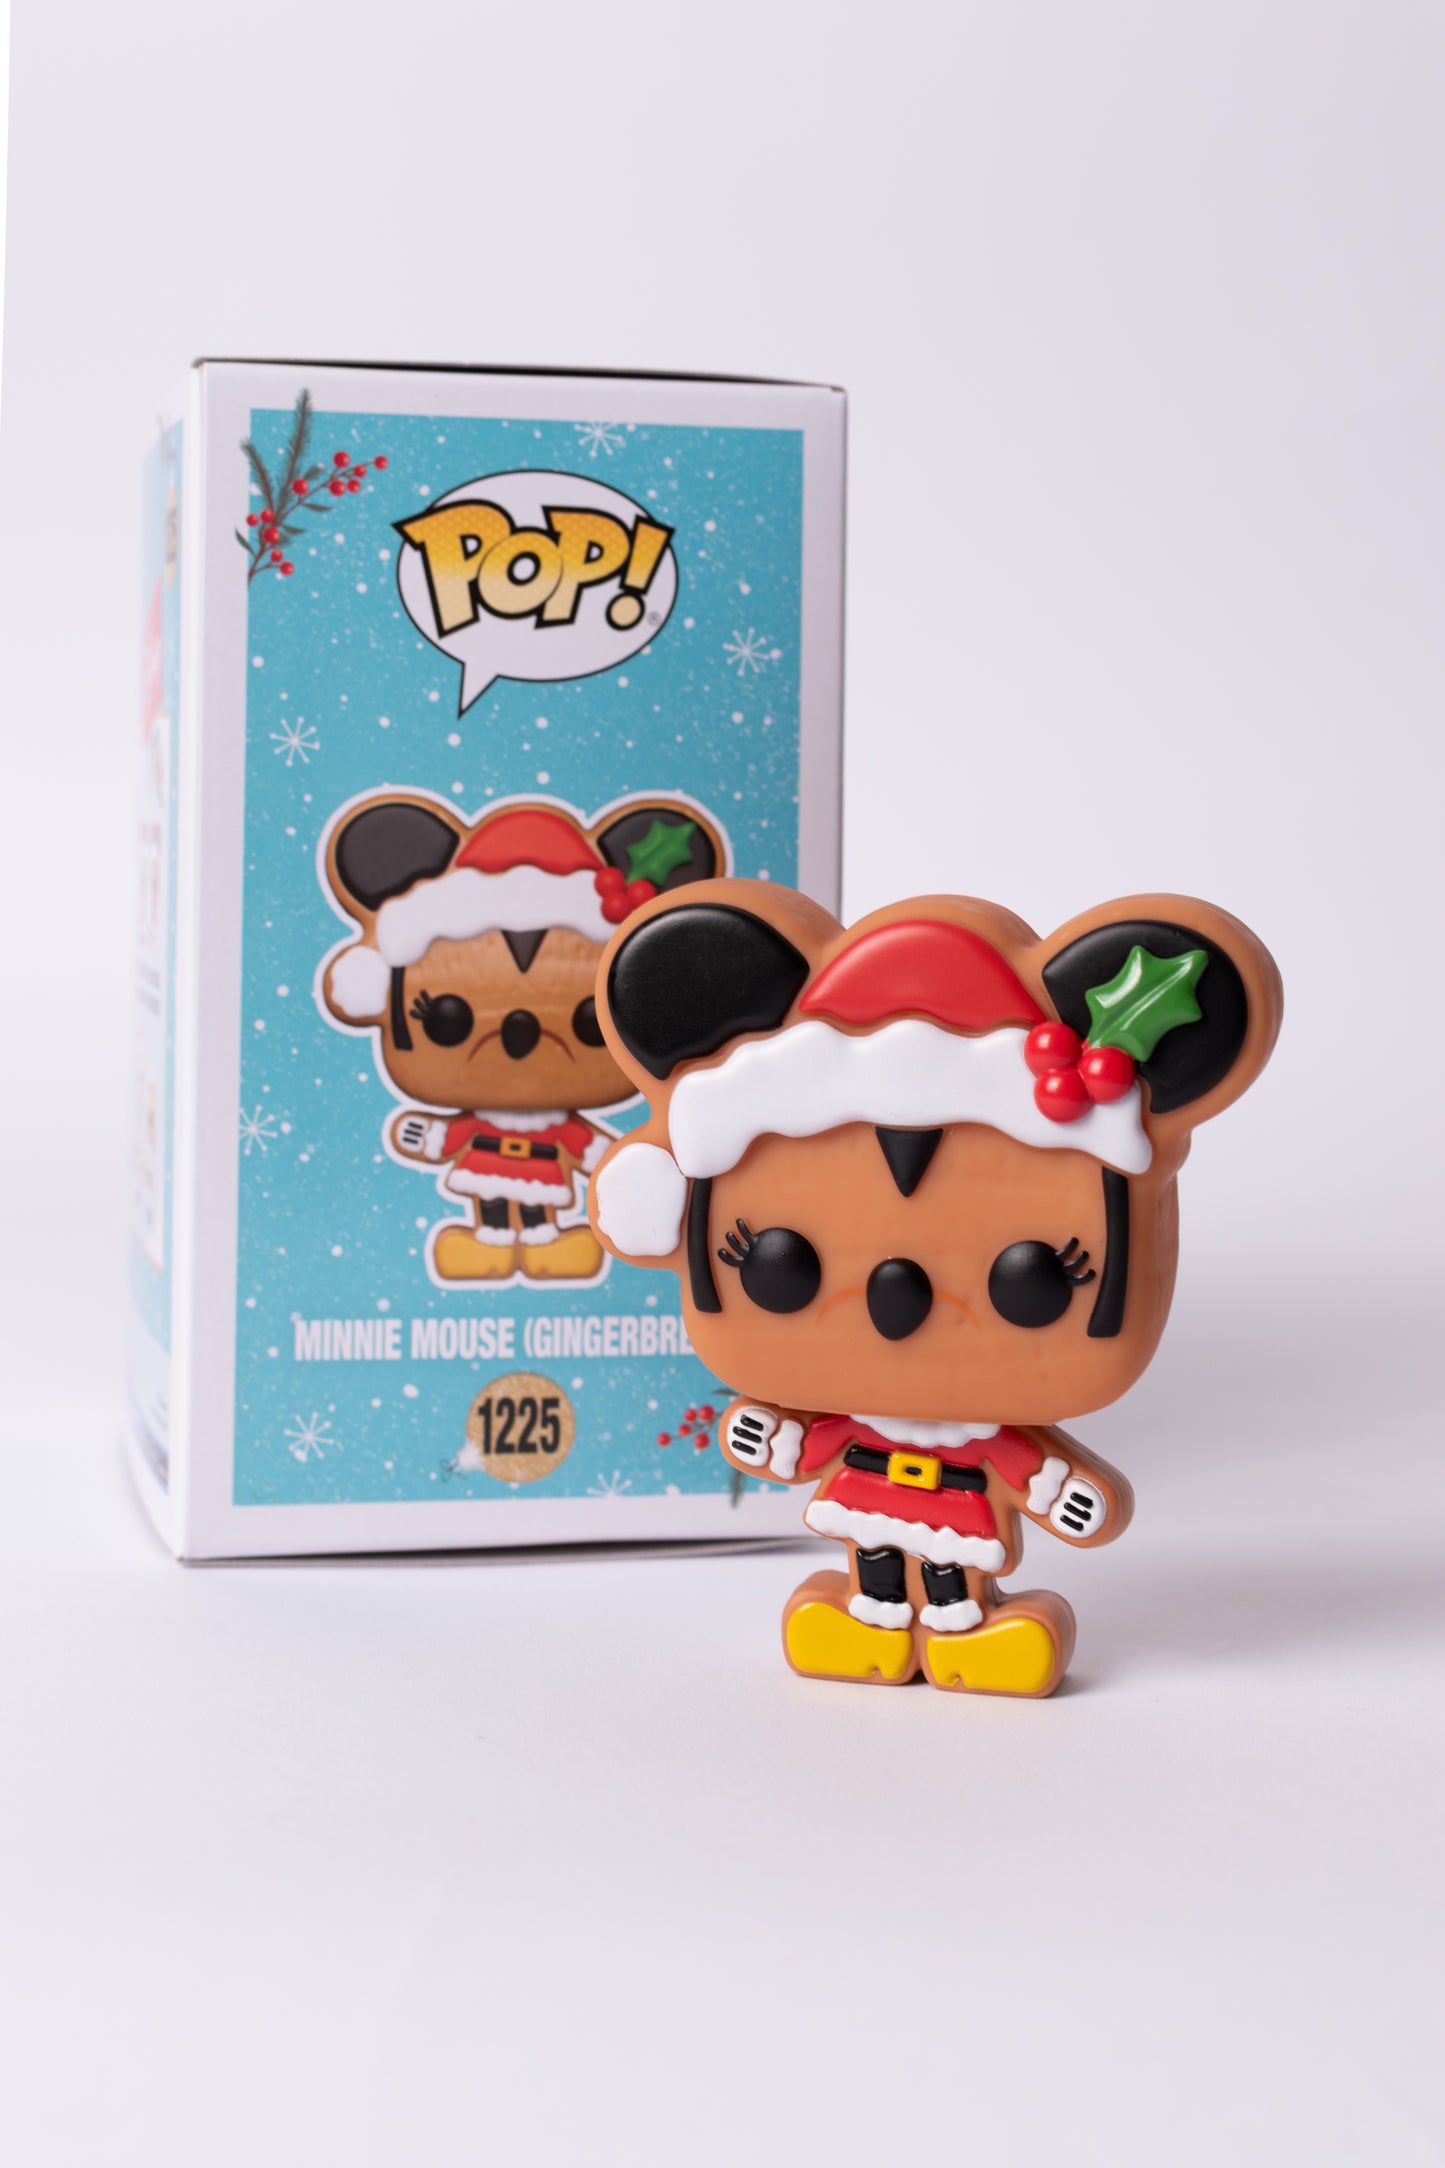 FUNKO POP HOLIDAY DISNEY GINGERBREAD MINNIE MOUSE